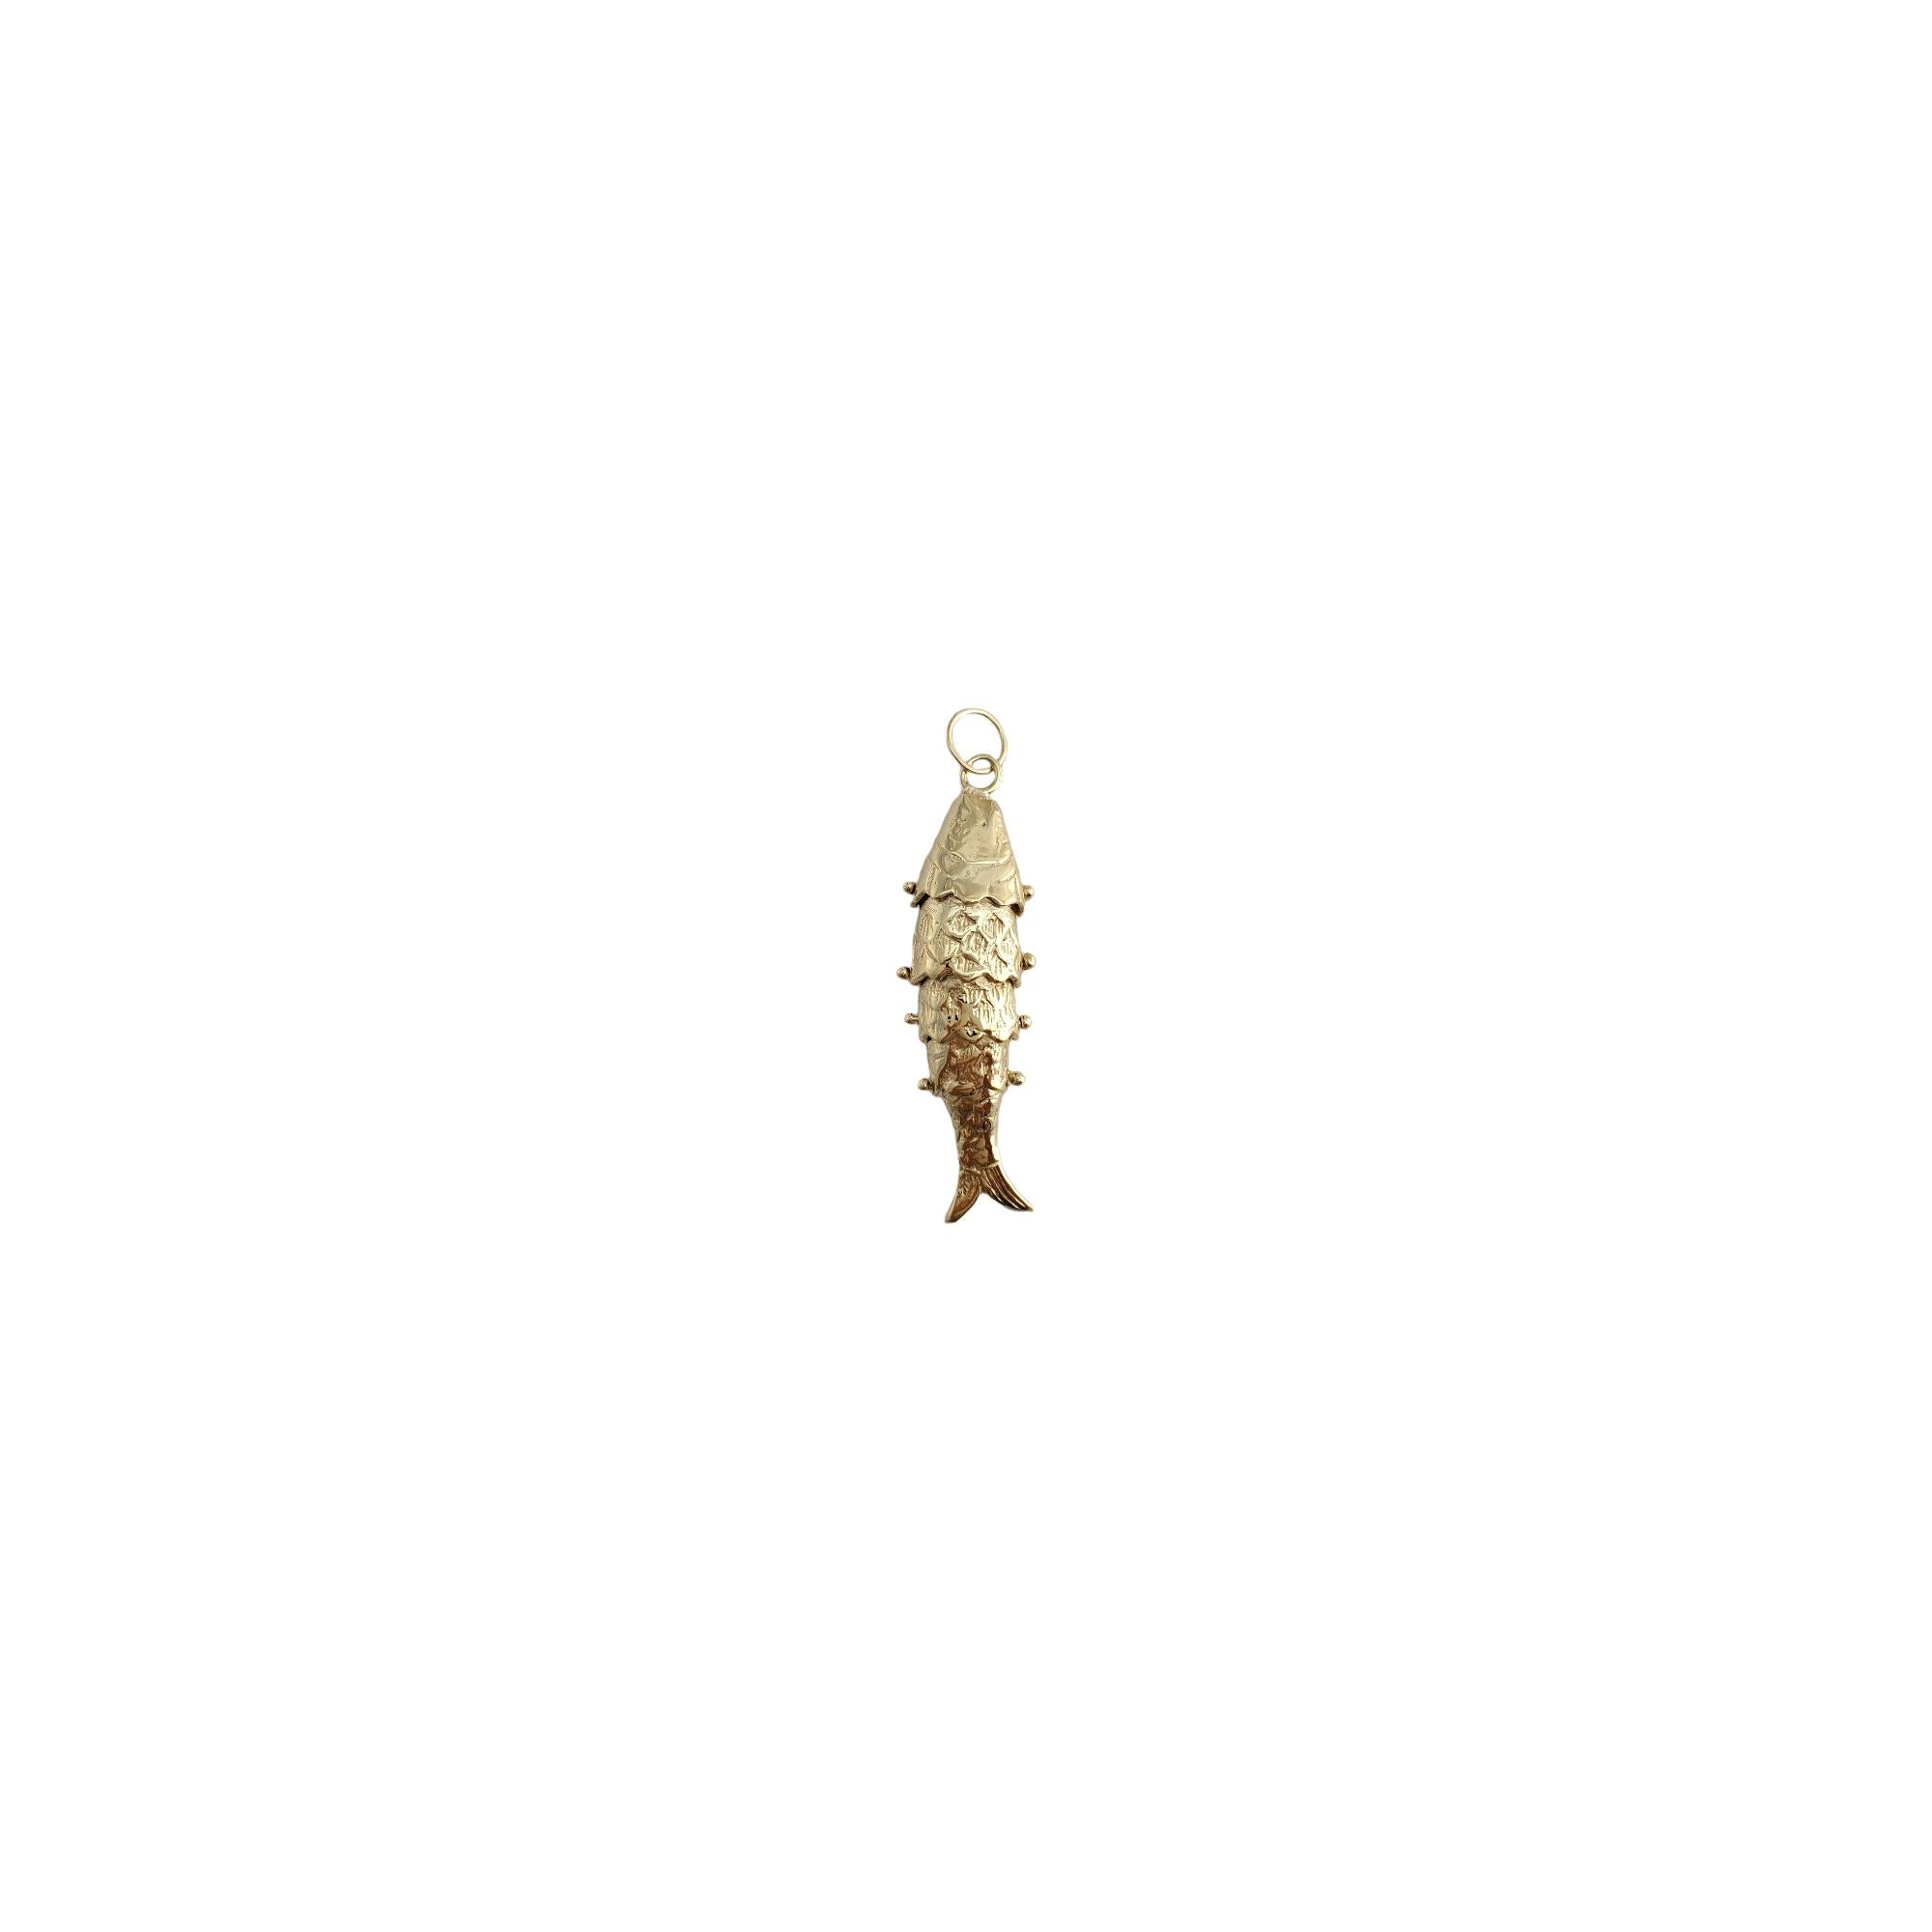 14K Yellow Gold Flexible Fish Charm

This meticulously detailed piece features an articulating fish charm.

Size: 45.03 mm X 13.14 mm 

Weight: 6.7 gr/ 4.3 dwt.

Hallmark: 14K

Very good condition, professionally polished.

Will come packaged in a